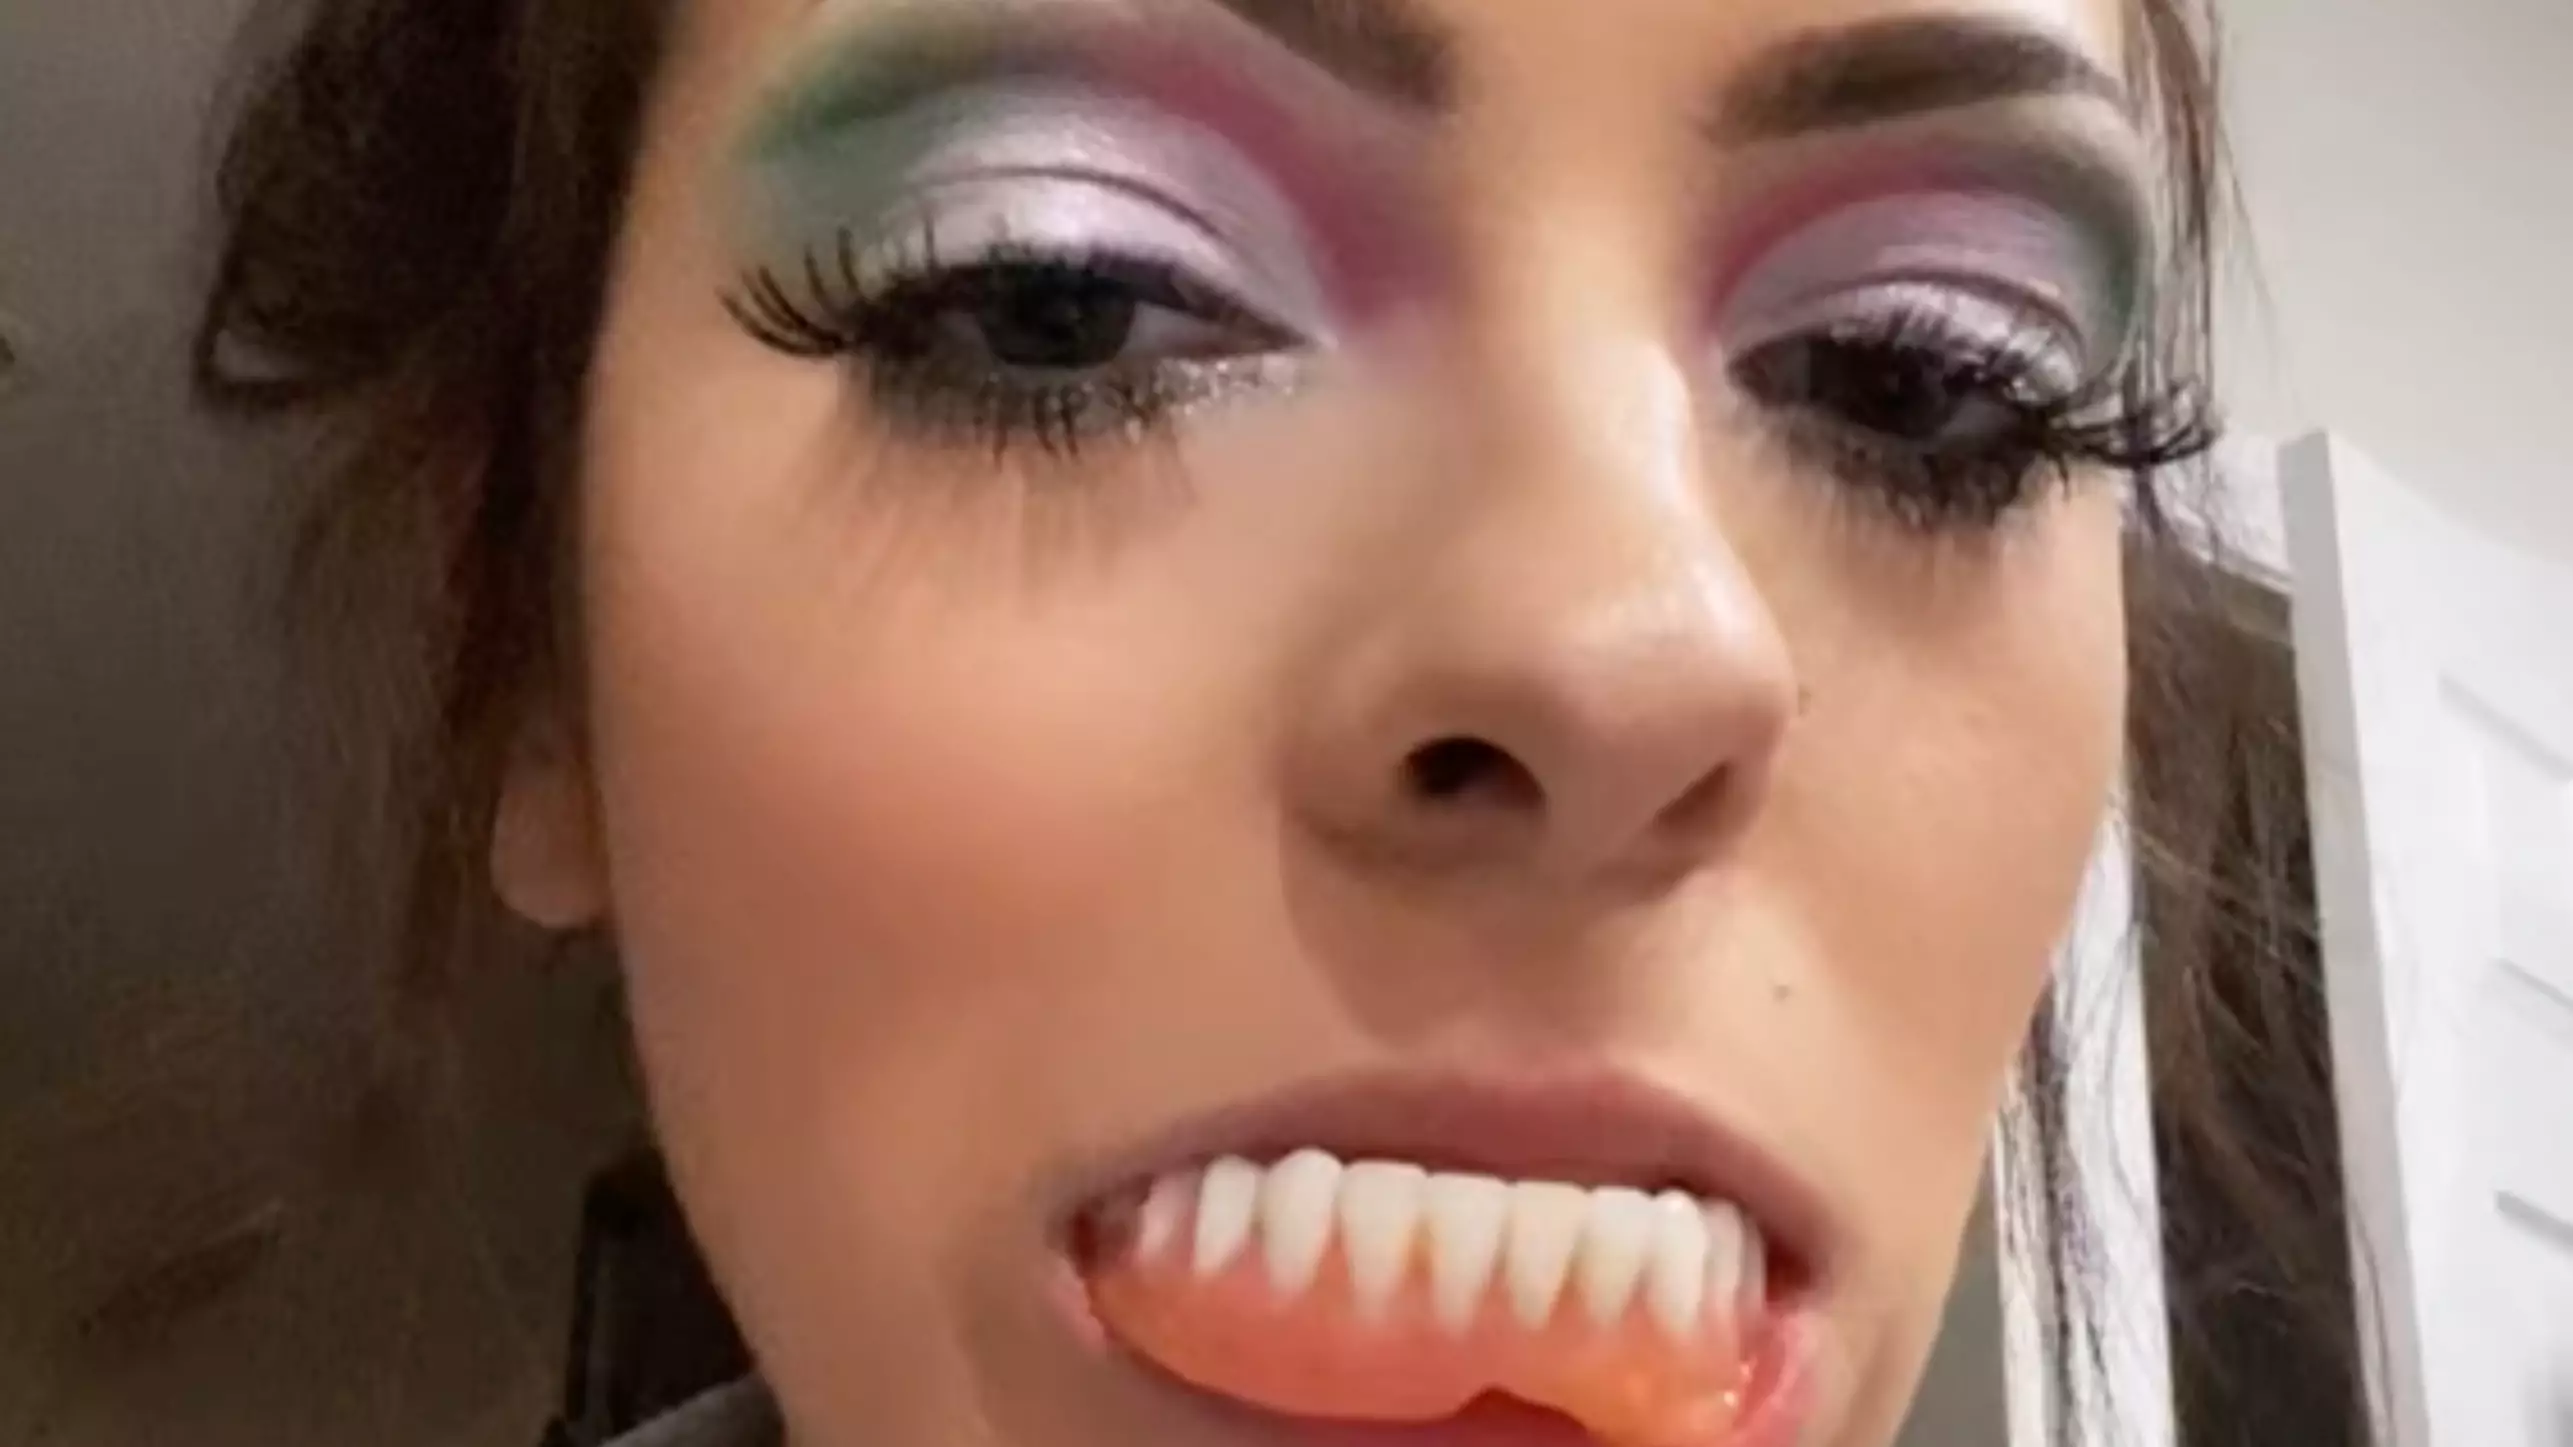 Woman, 24, Forced To Wear Dentures Following Botched Root Canal Treatment